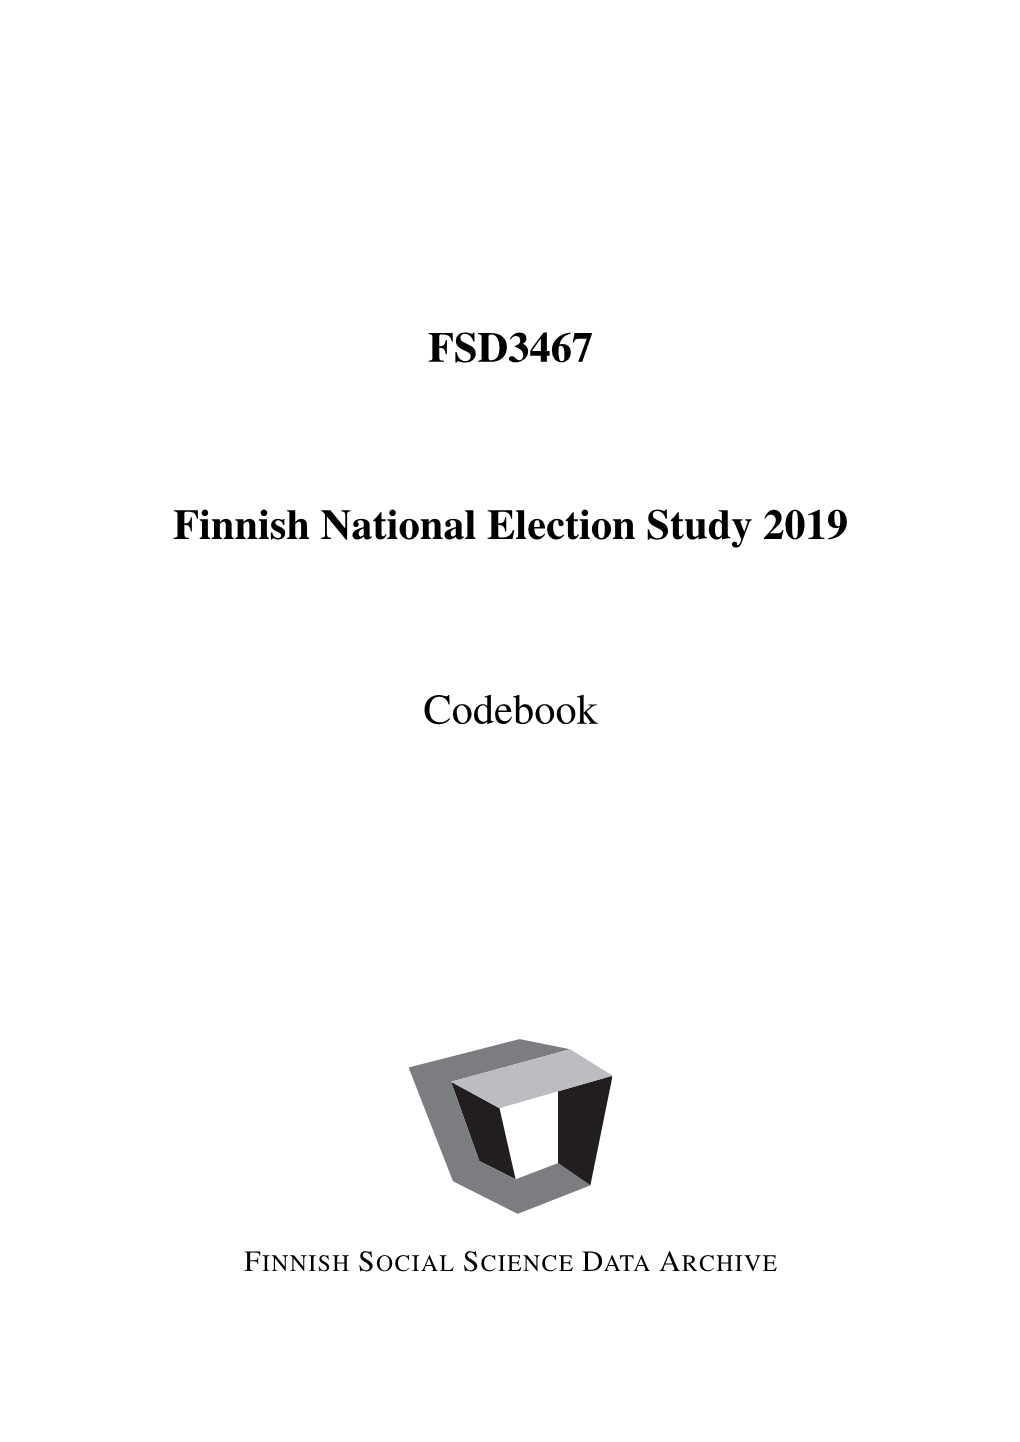 FSD3467 Finnish National Election Study 2019 Codebook